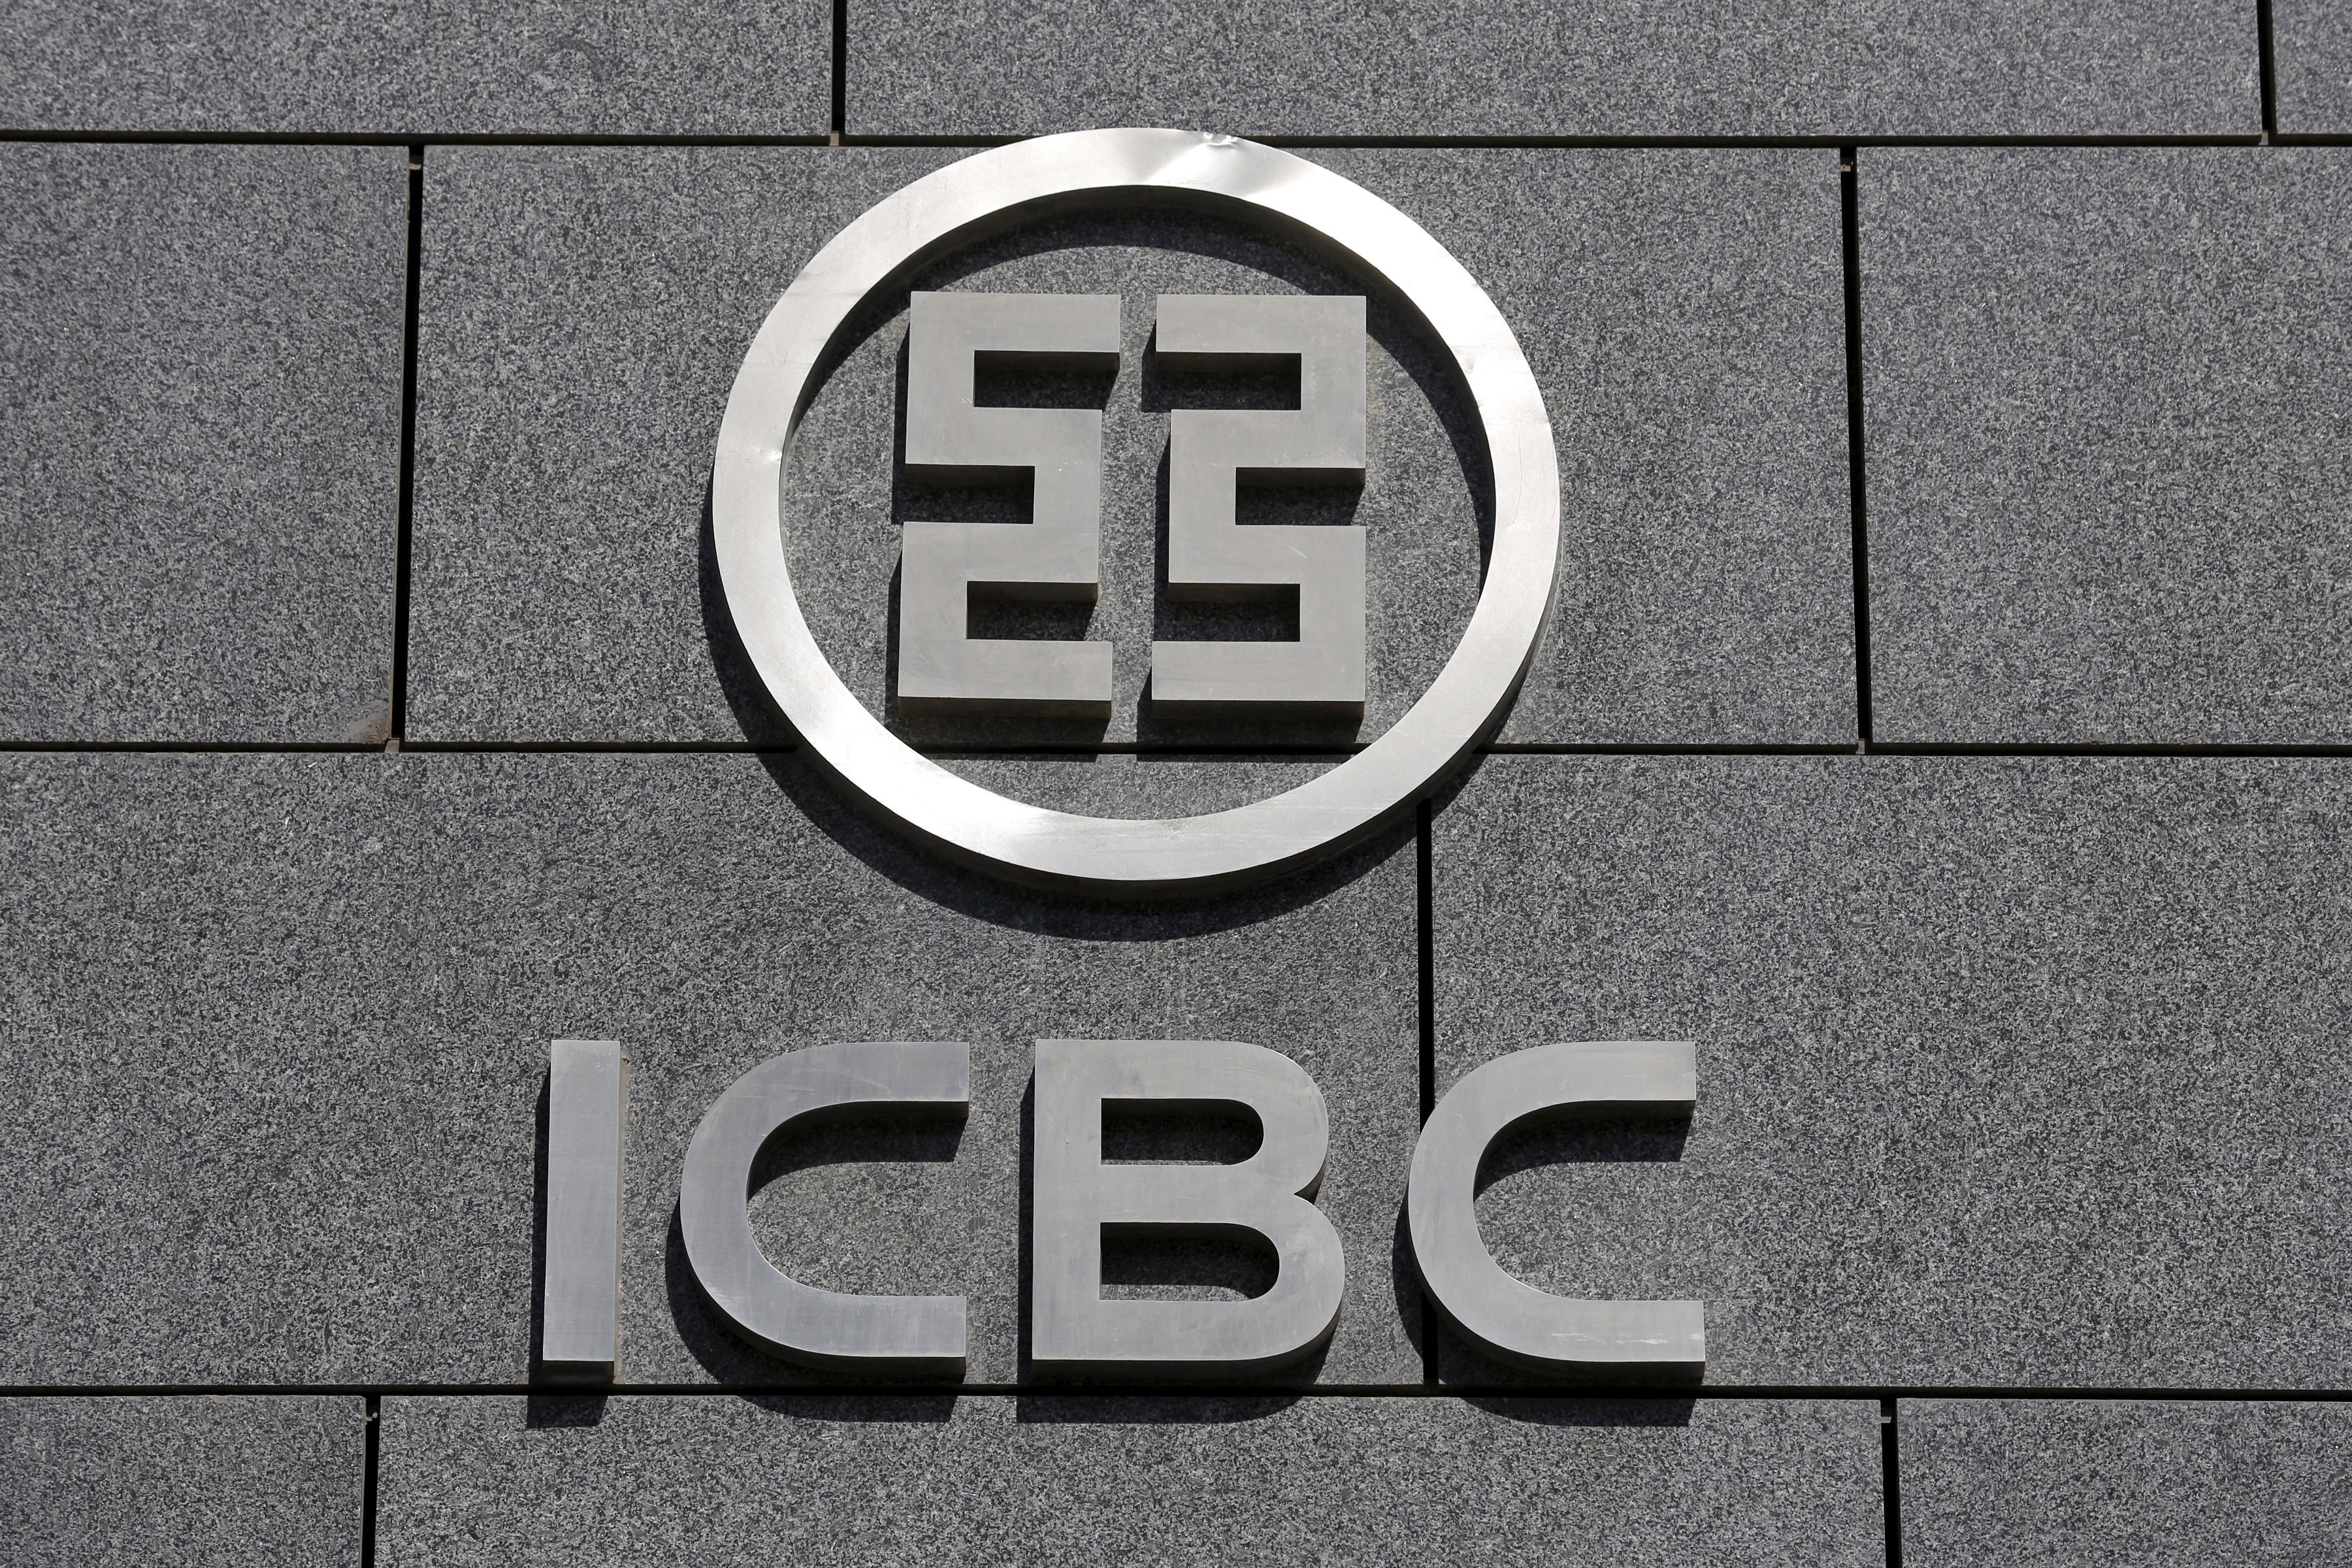 ICBC confirmed that a ransomware attack at its ICBC Financial Services unit had disrupted some of its systems last week. Photo: Reuters